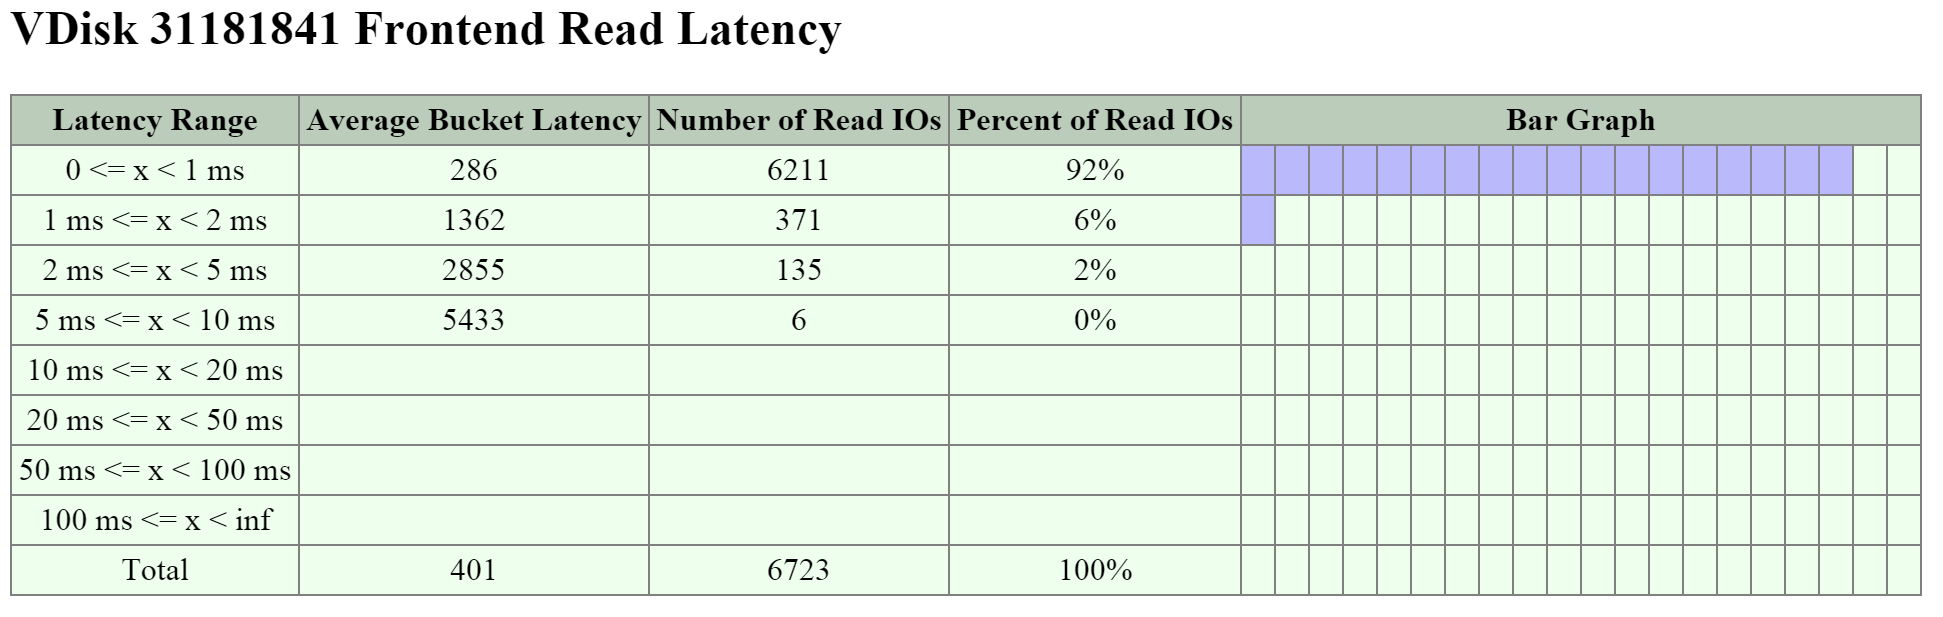 2009 Page - vDisk Stats - Frontend Read Latency